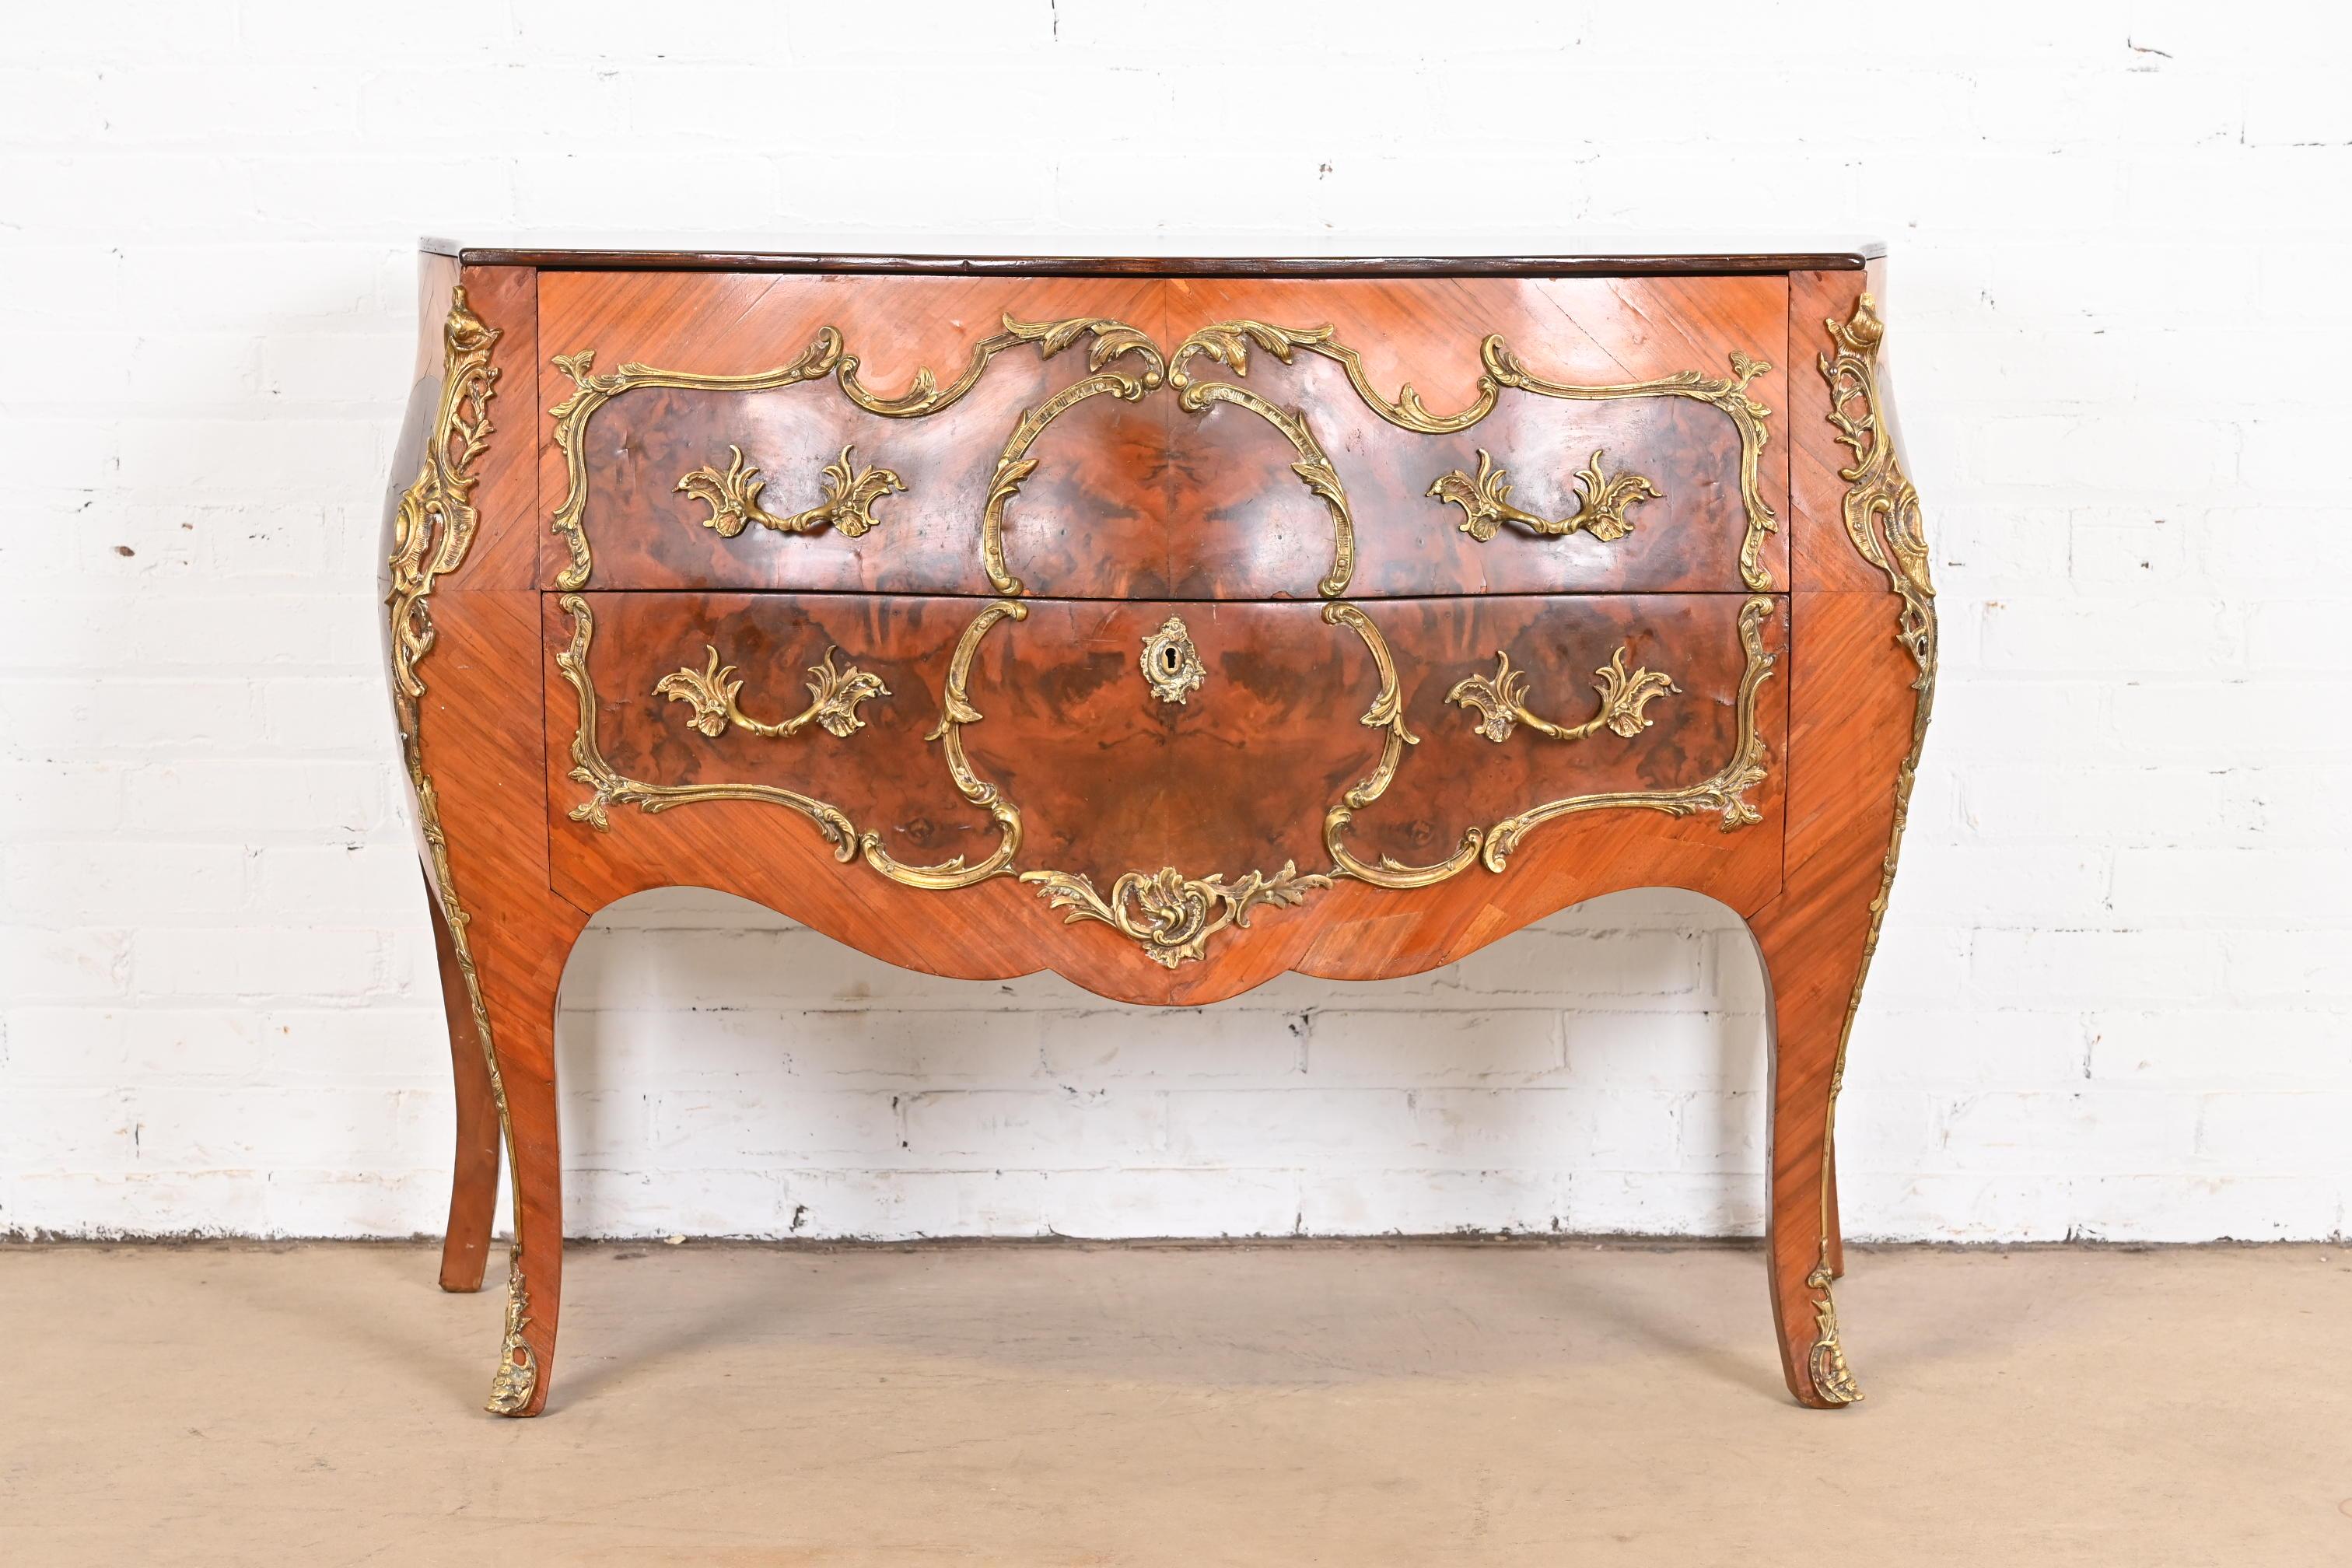 Antique French Louis XV Bombay Chest Commode with Mounted Bronze Ormolu In Good Condition For Sale In South Bend, IN